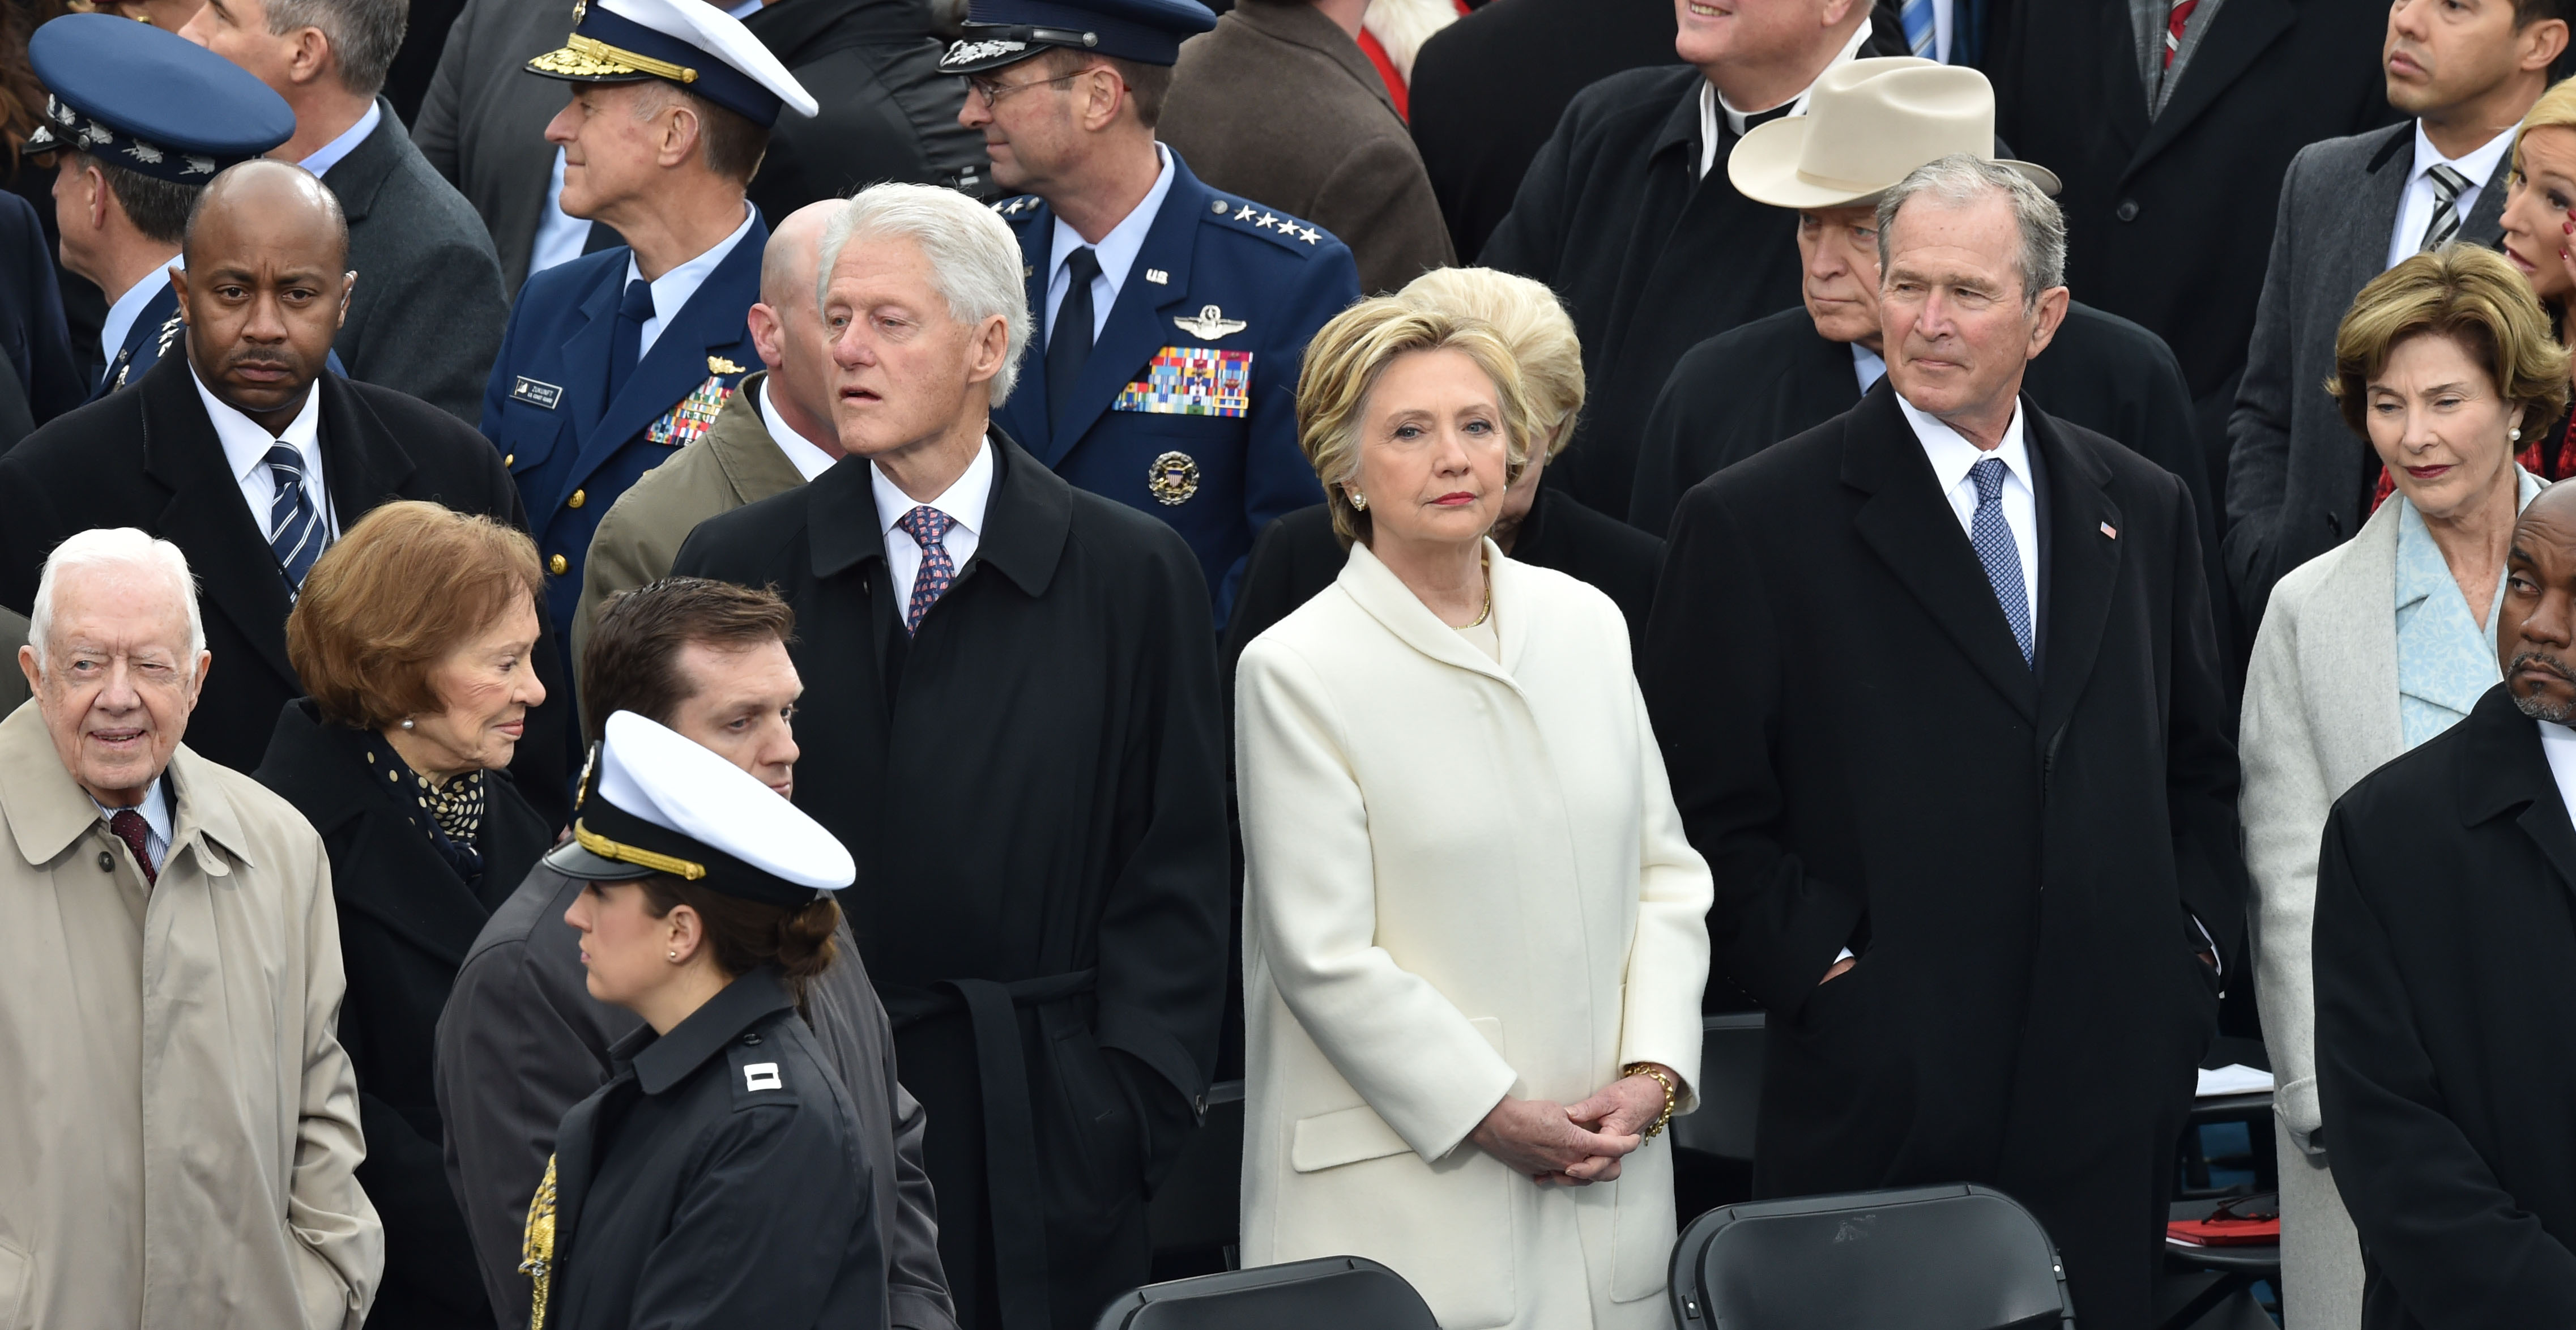 Former Us President Bill Clinton(L), former US President Jimmy Carter(L) former US President George W. Bush(2ndR) and Hillary Clinton(C) arrive on the platform of the US Capitol in Washington, DC, on January 20, 2017, before the swearing-in ceremony of US President-elect Donald Trump. / AFP / Paul J. Richards        (Photo credit should read PAUL J. RICHARDS/AFP/Getty Images) (PAUL J. RICHARDS—AFP/Getty Images)